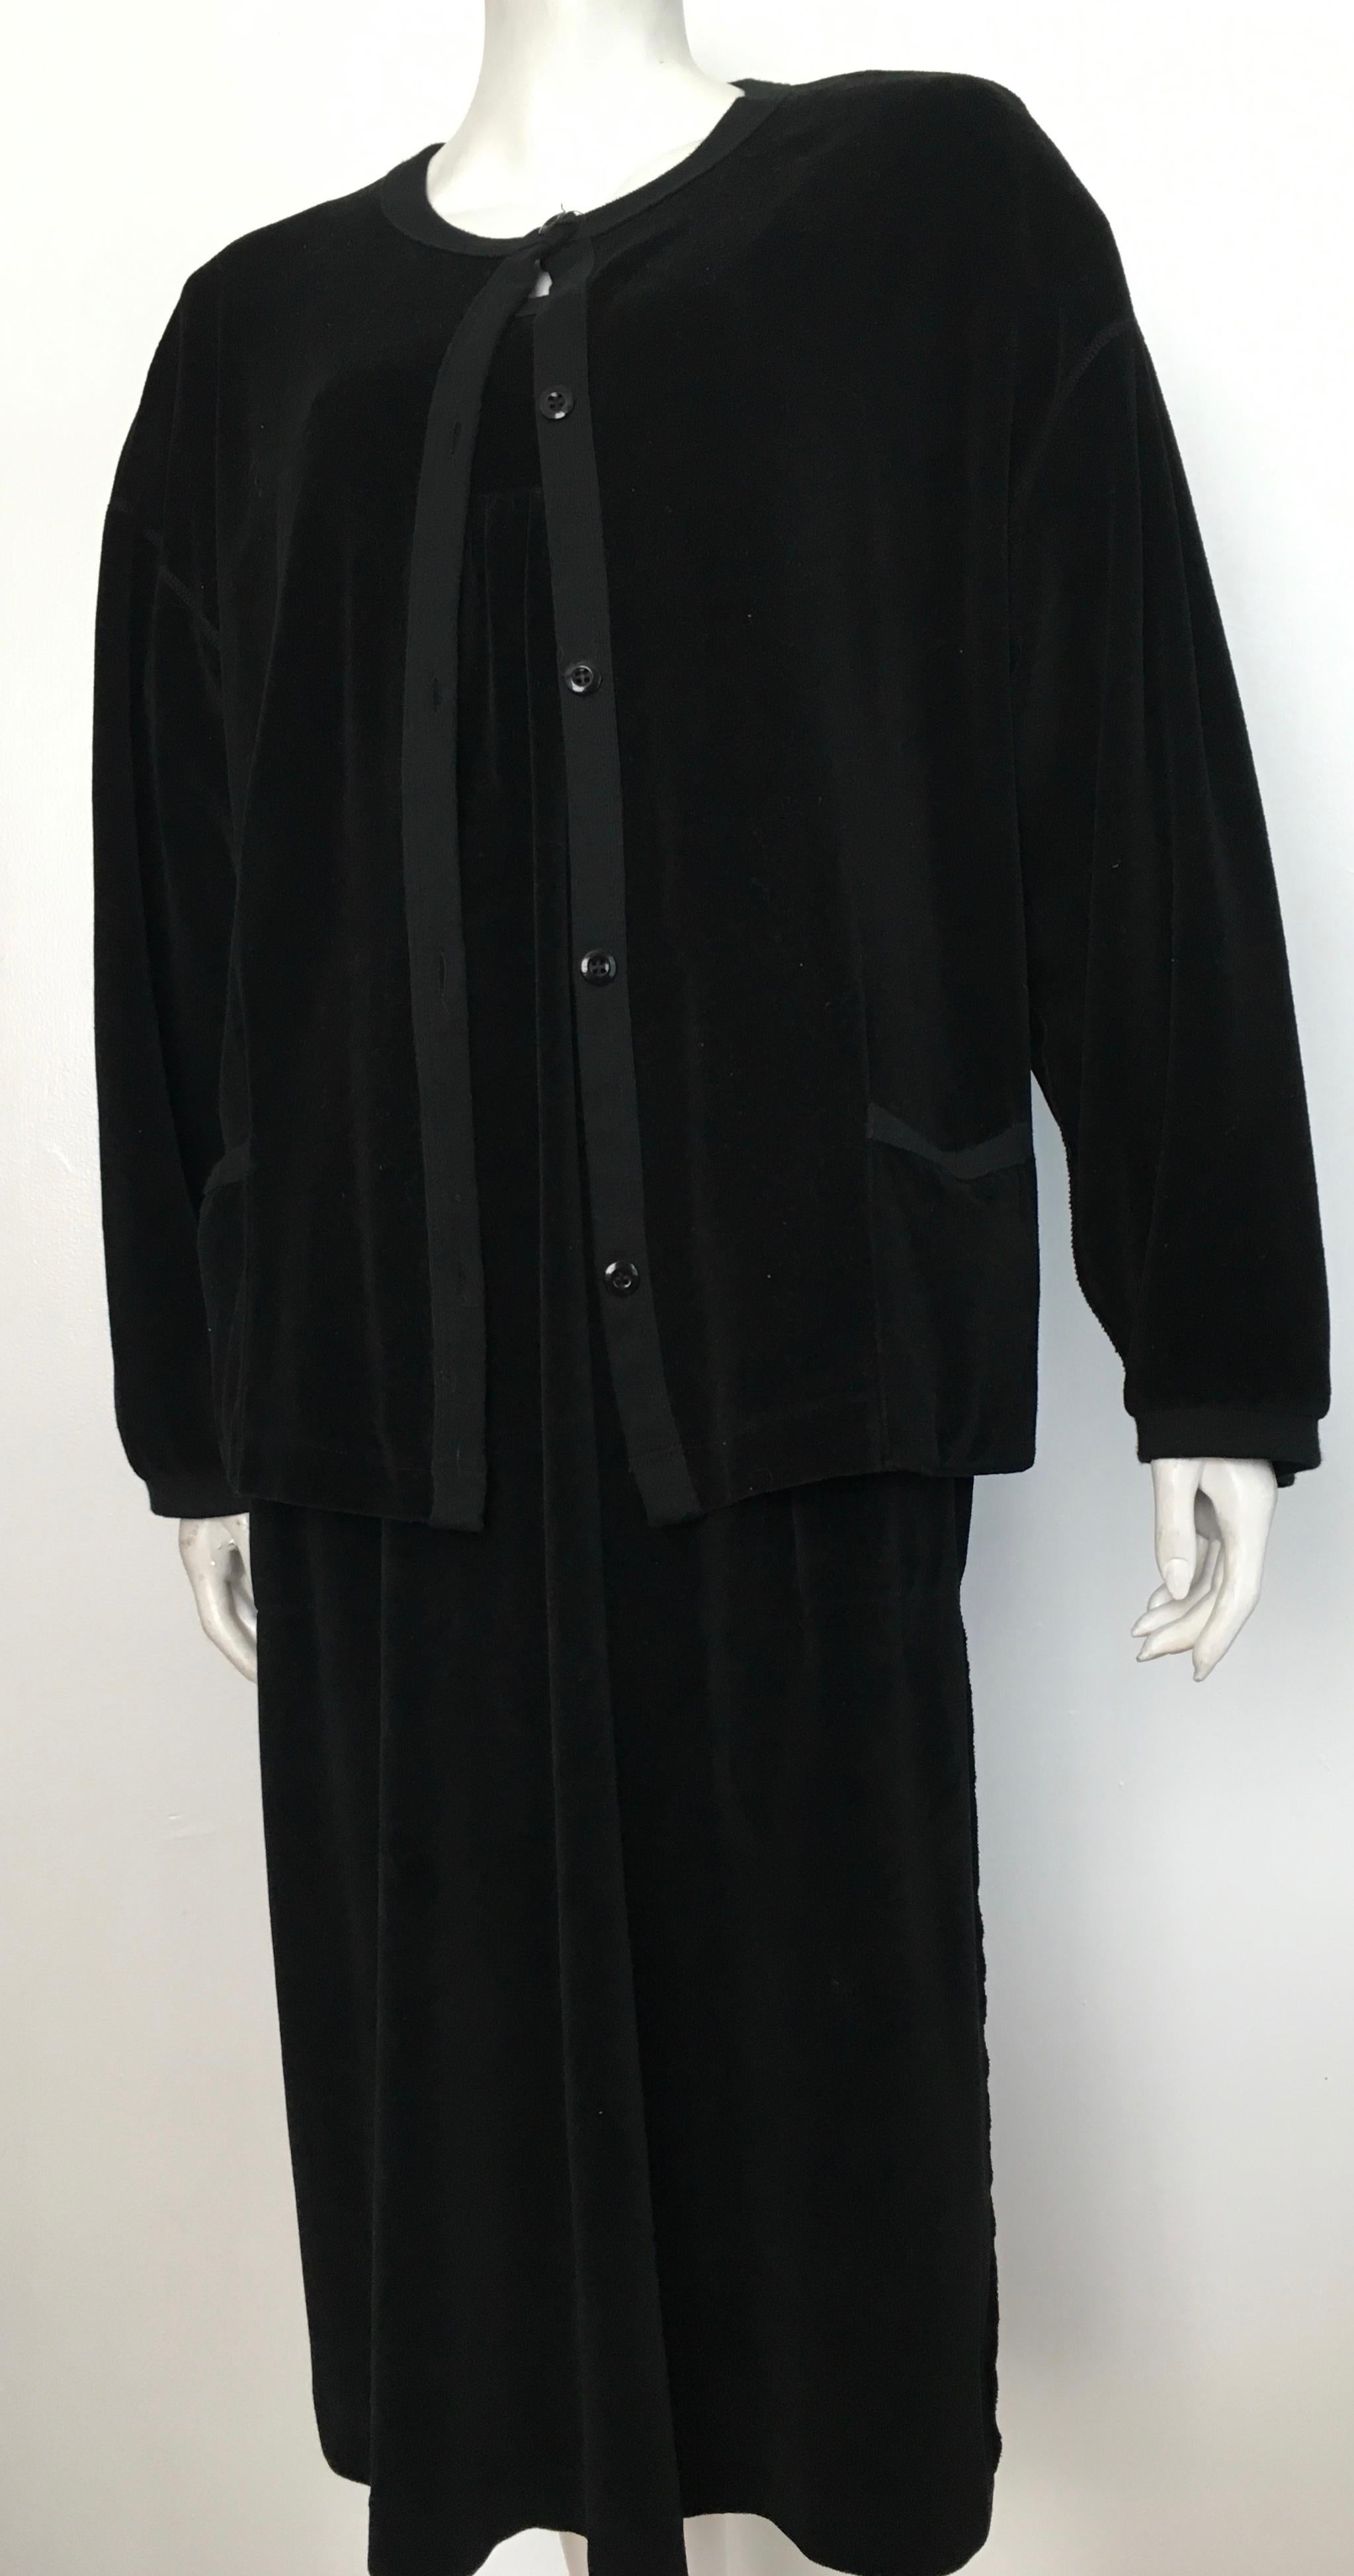 Sonia Rykiel 1980s Black Velour Dress with Pockets & Cardigan Size Large. For Sale 13